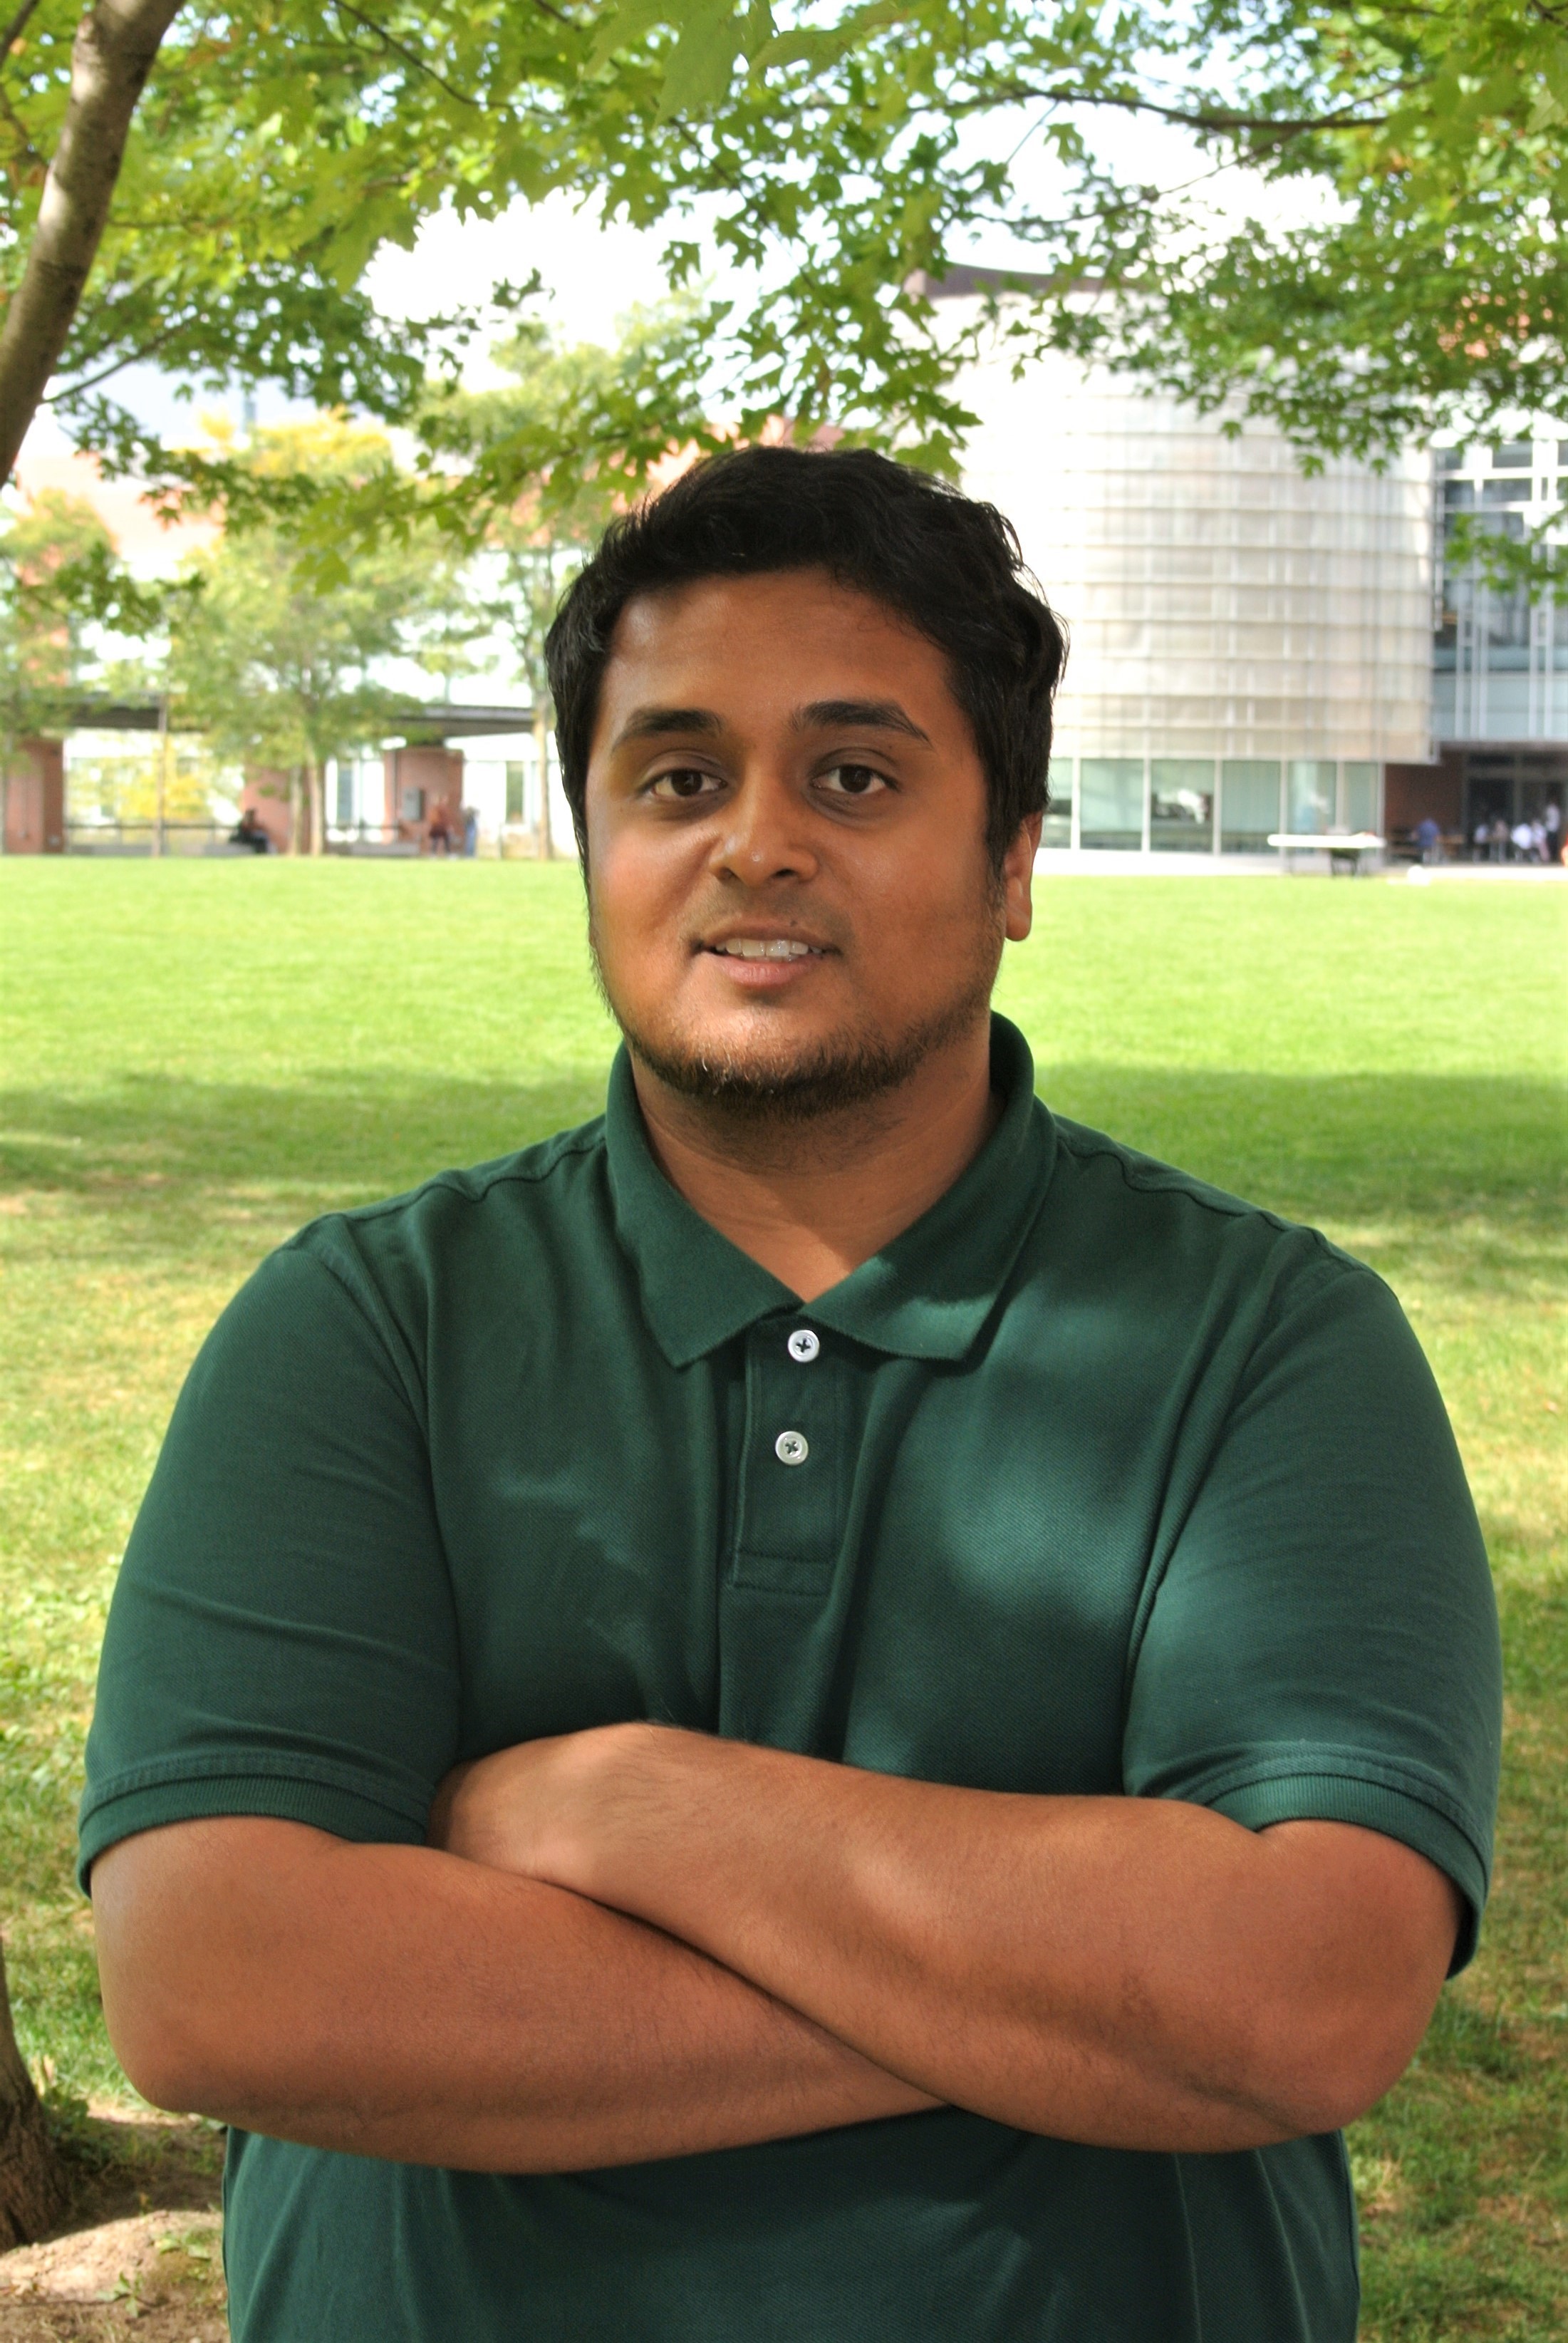 A portrait of Adwan Syed, a computer science student